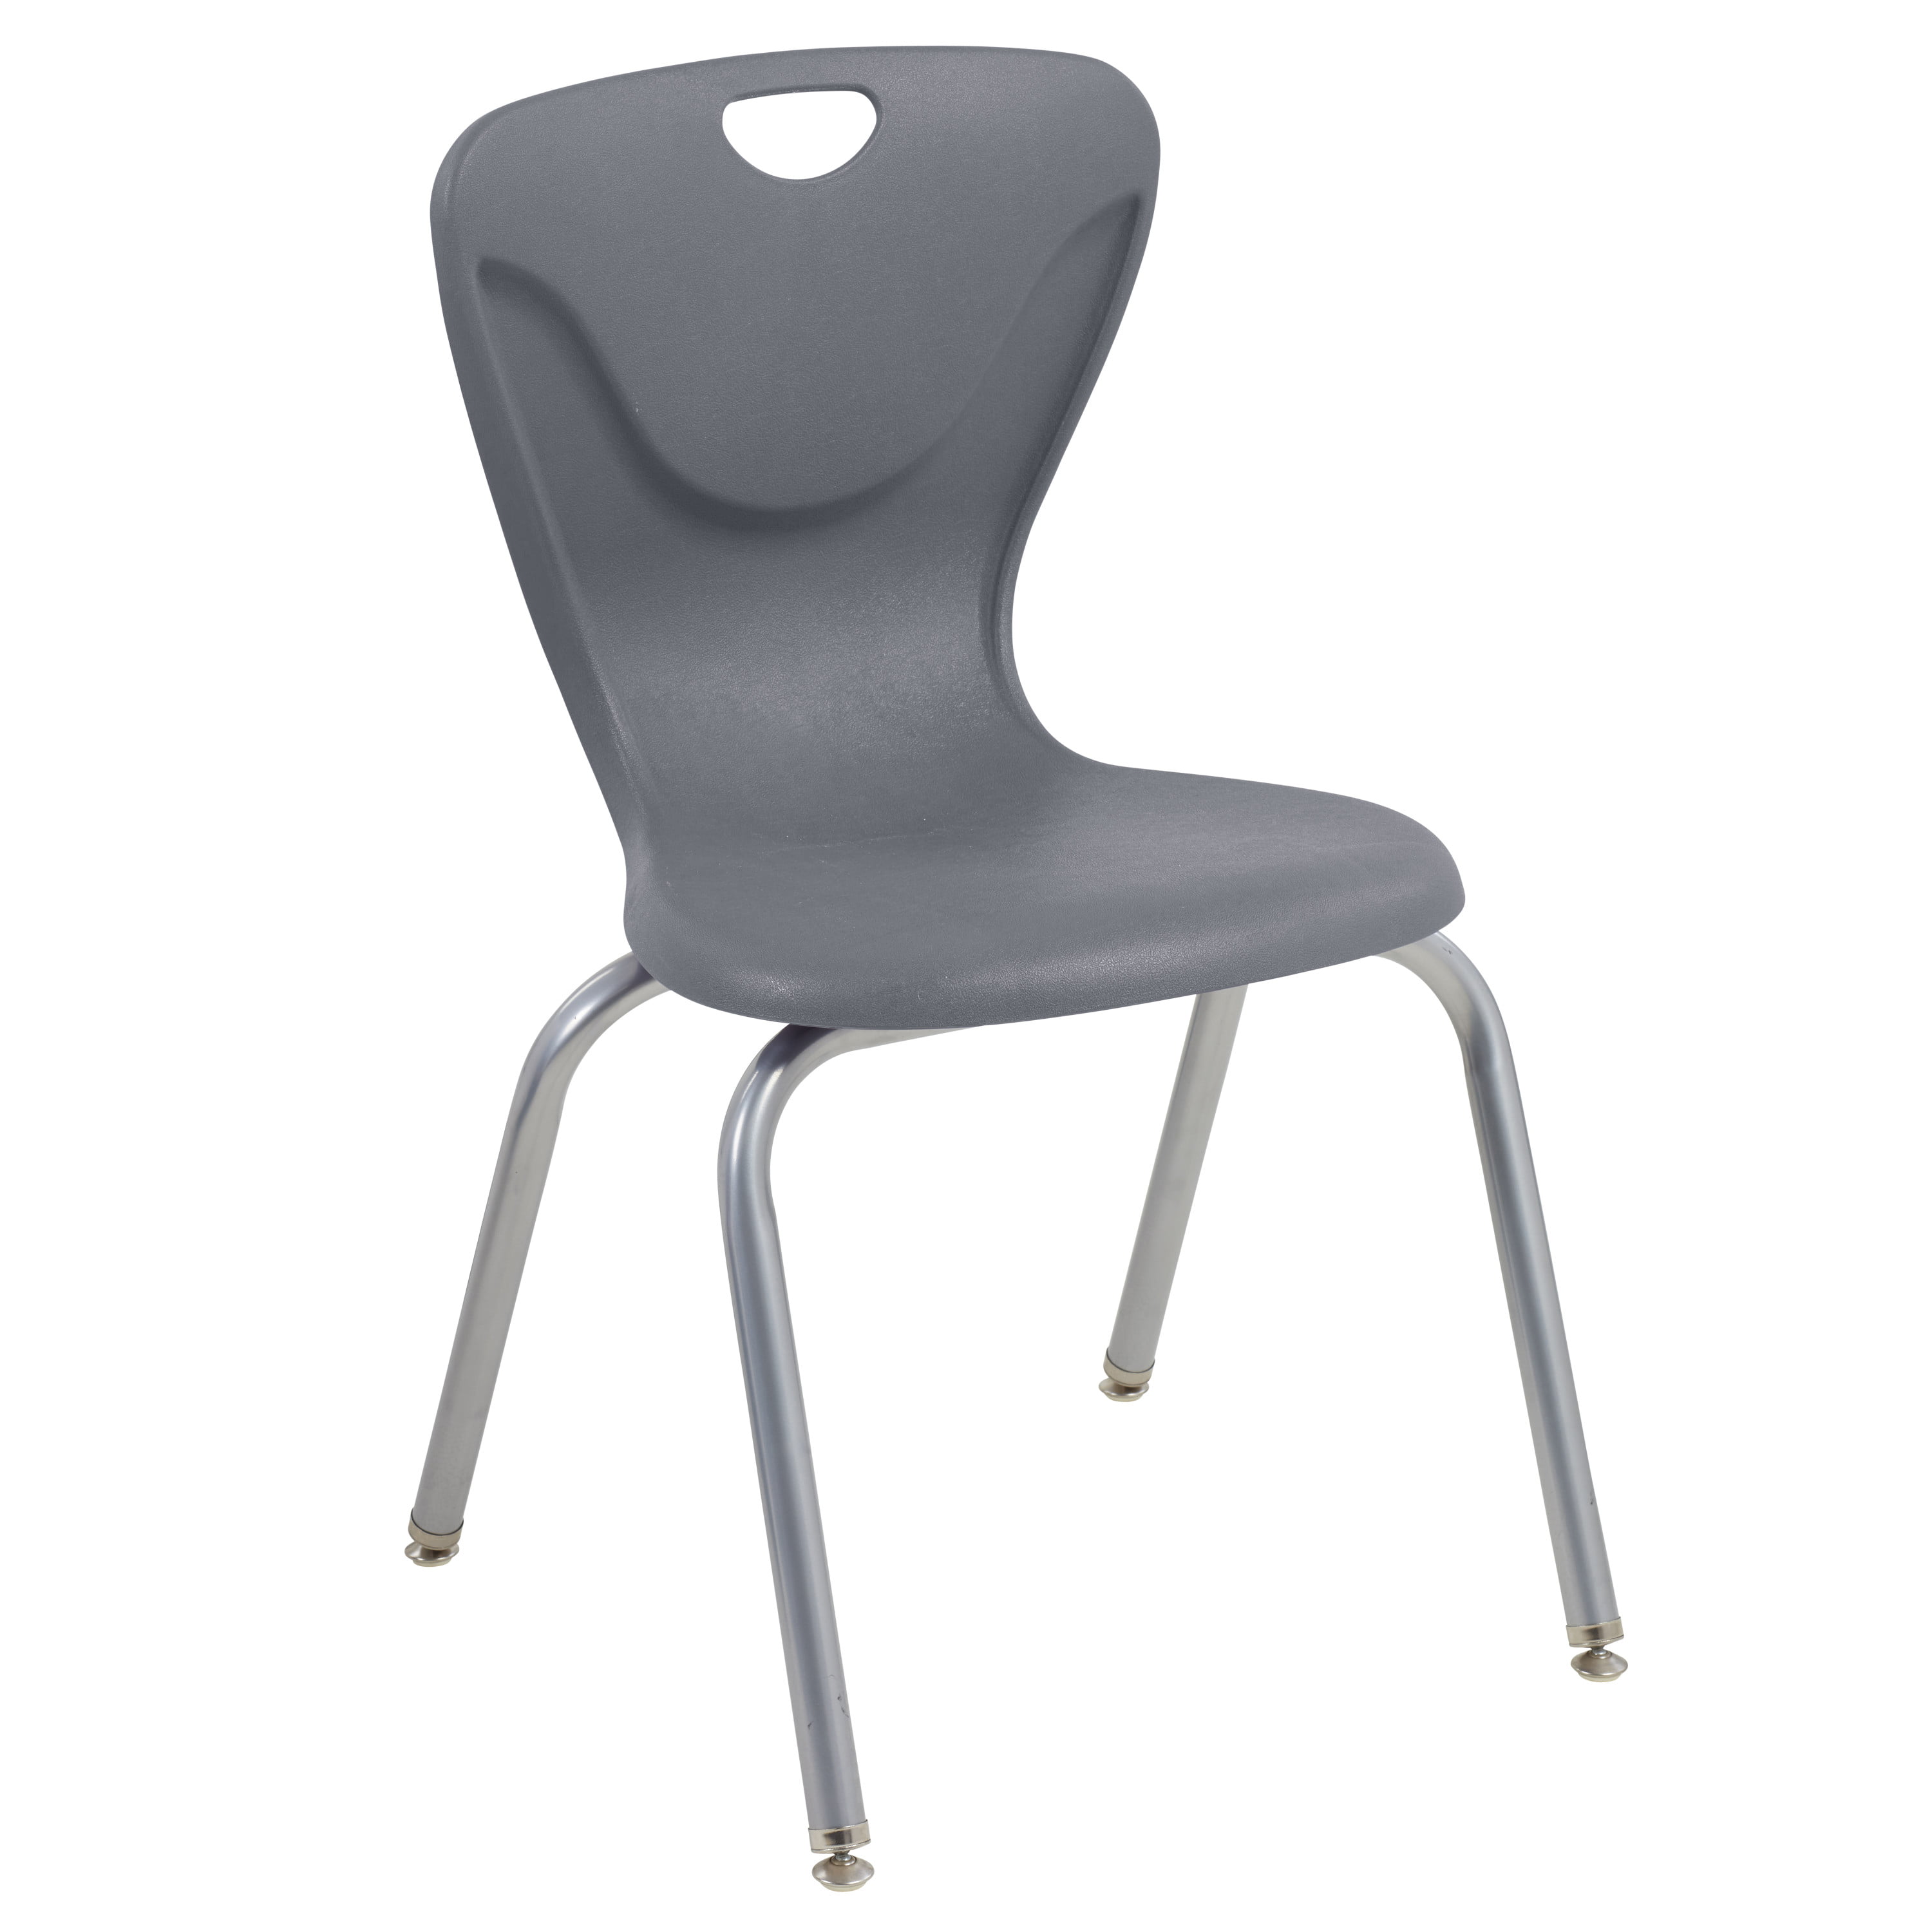 - Chair Eggplant Contour 12in